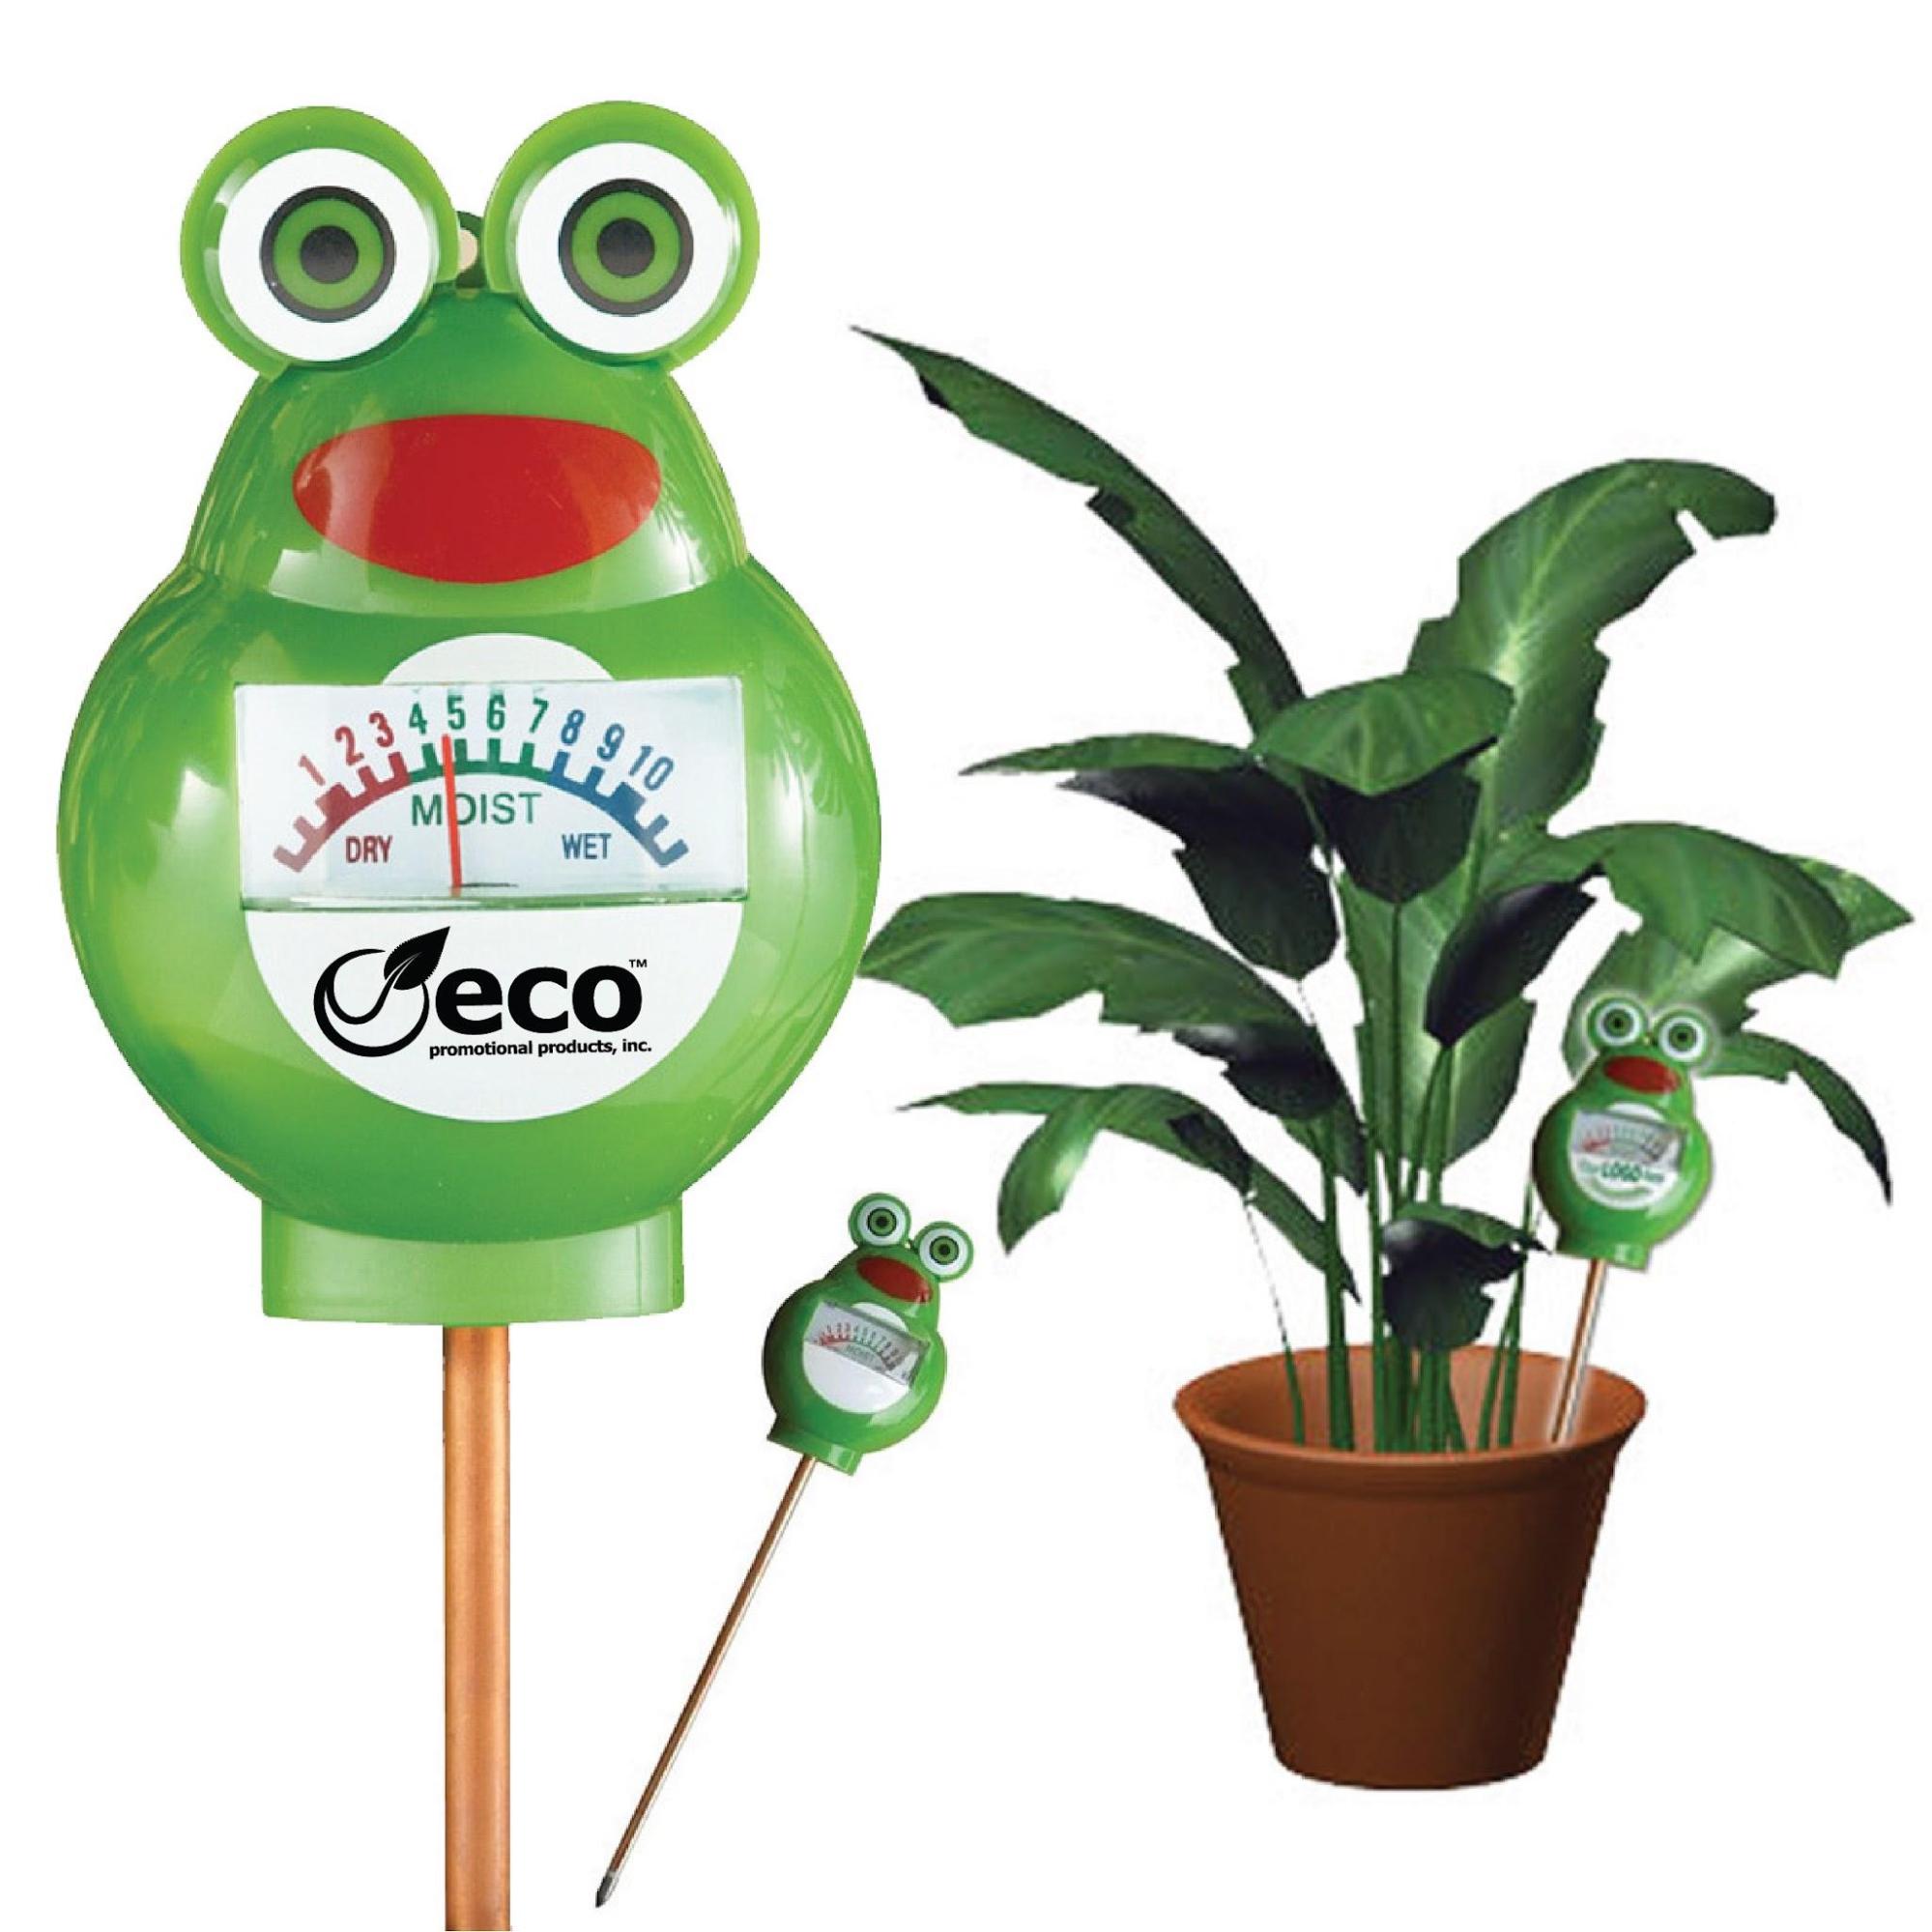 green frog water conservation meter with logo, plant pot with moisture meter